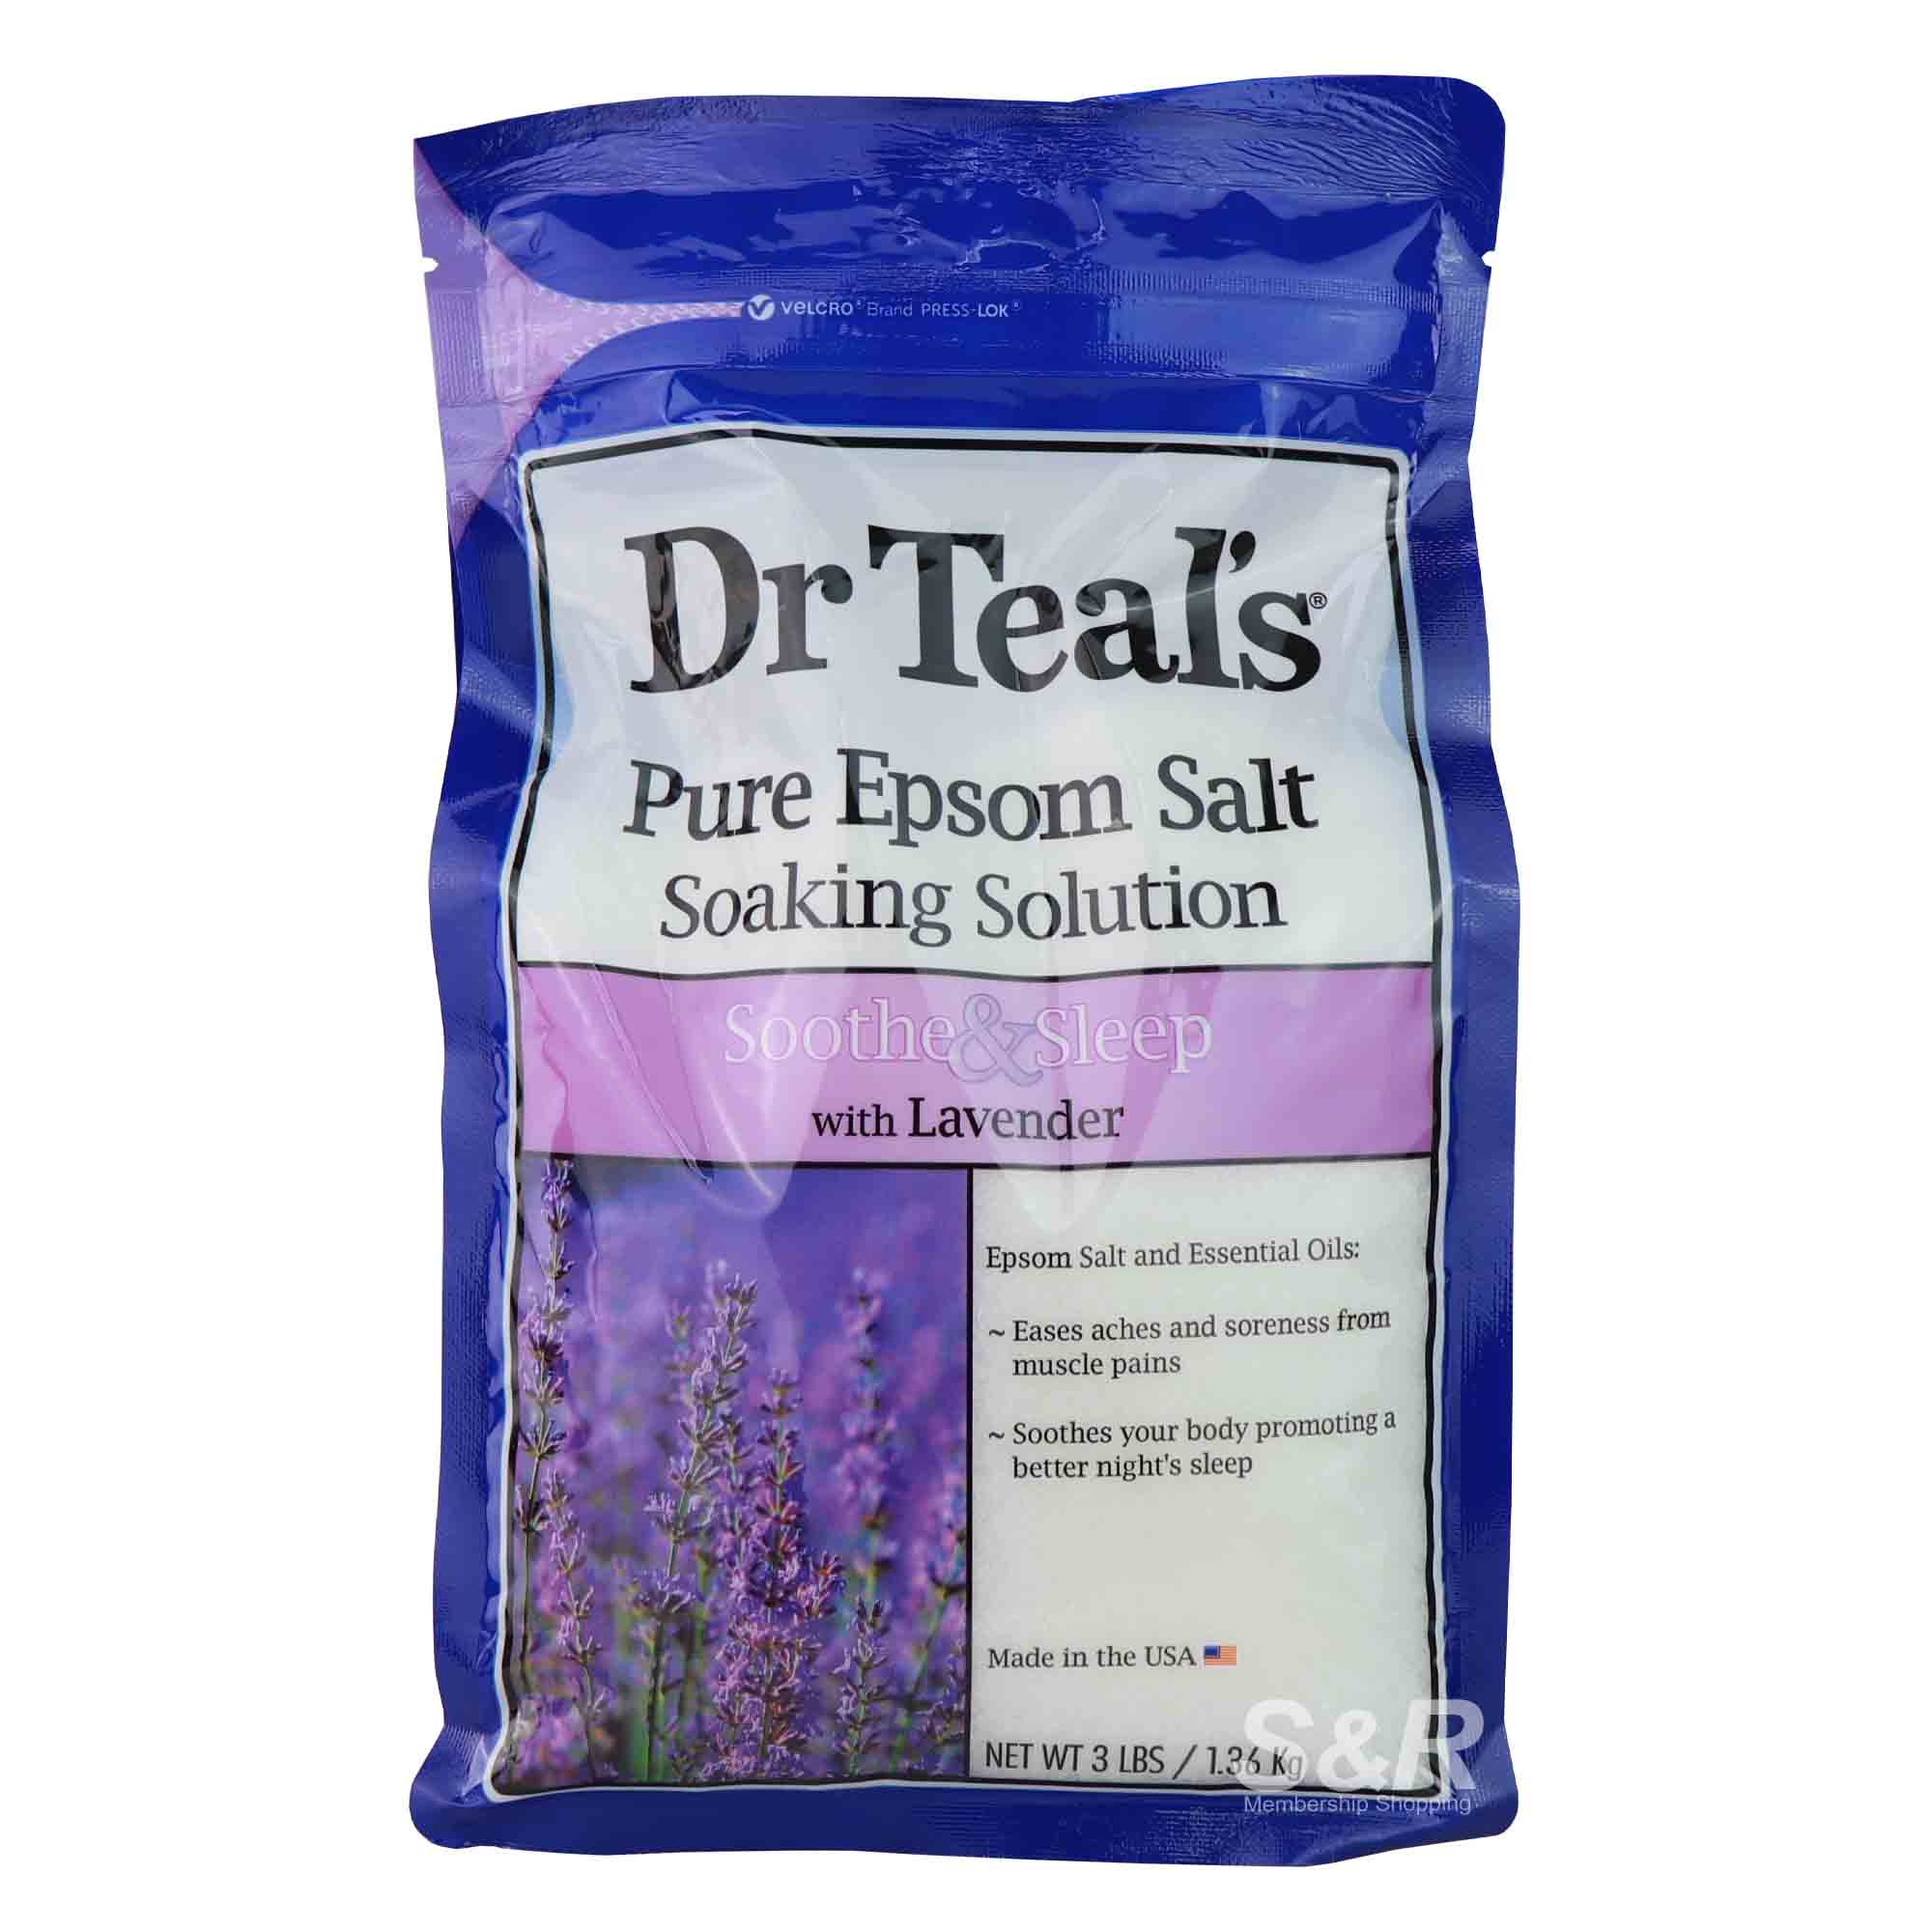 Dr. Teal's Pure Epsom Salt Soothe and Sleep with Lavender 1.36kg